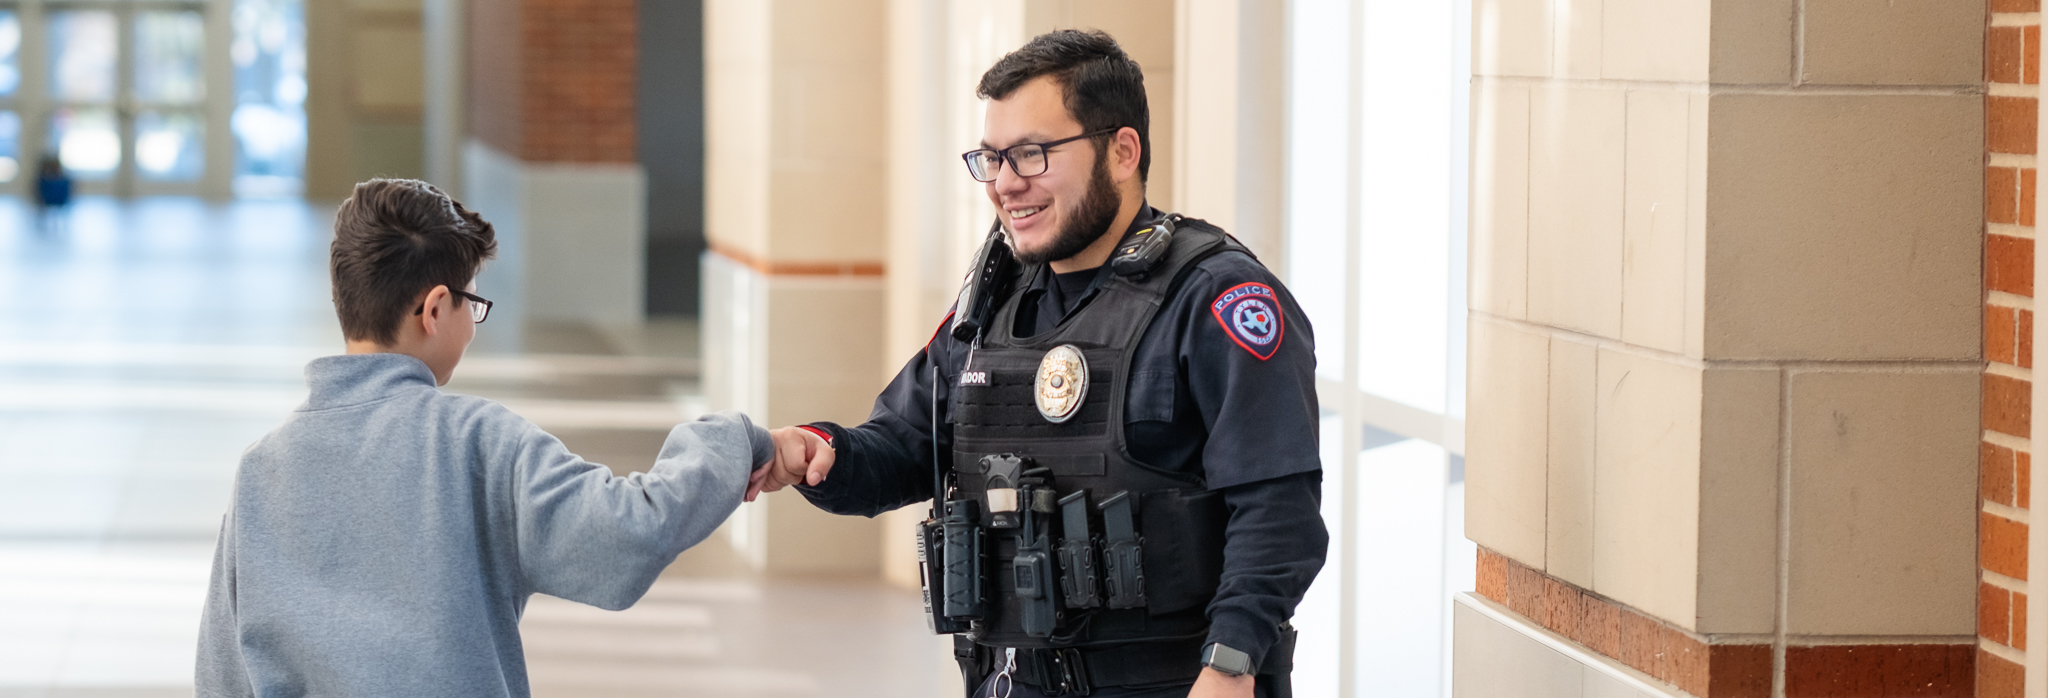 student fist bumping officer